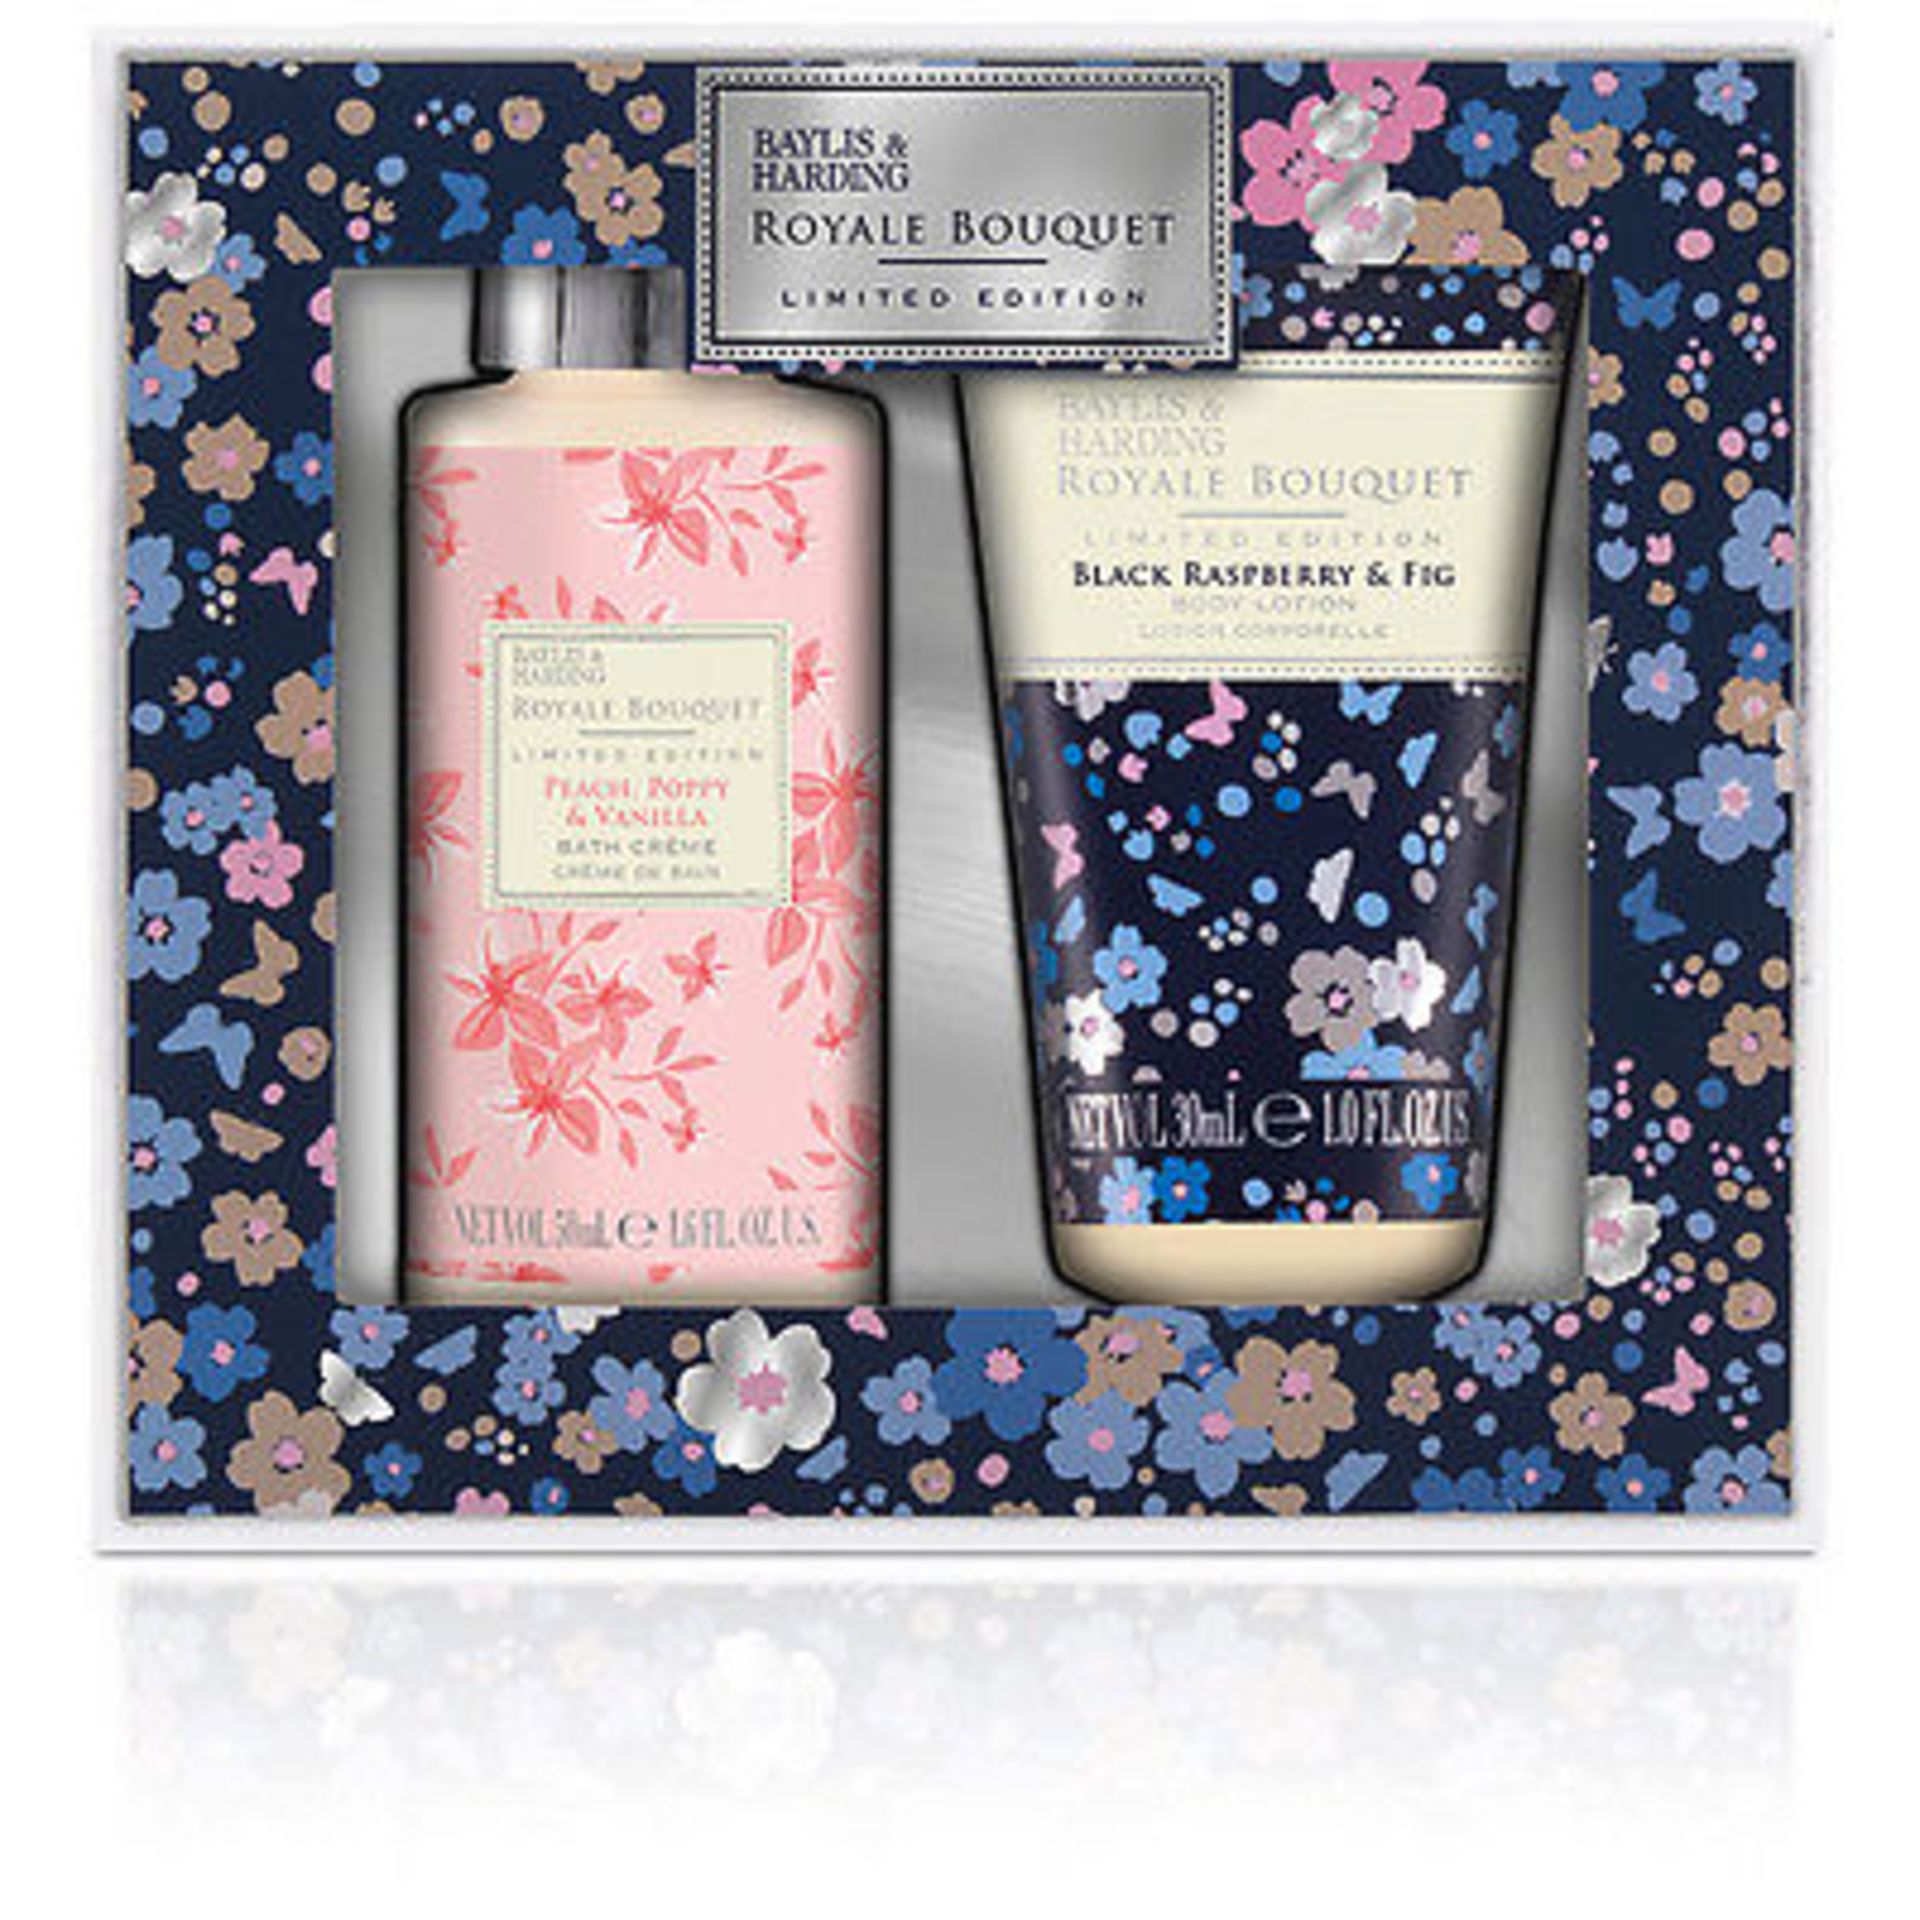 V *TRADE QTY* Brand New Baylis & Harding Royale Bouquet Limited Edition Duo Set - Including 30ml